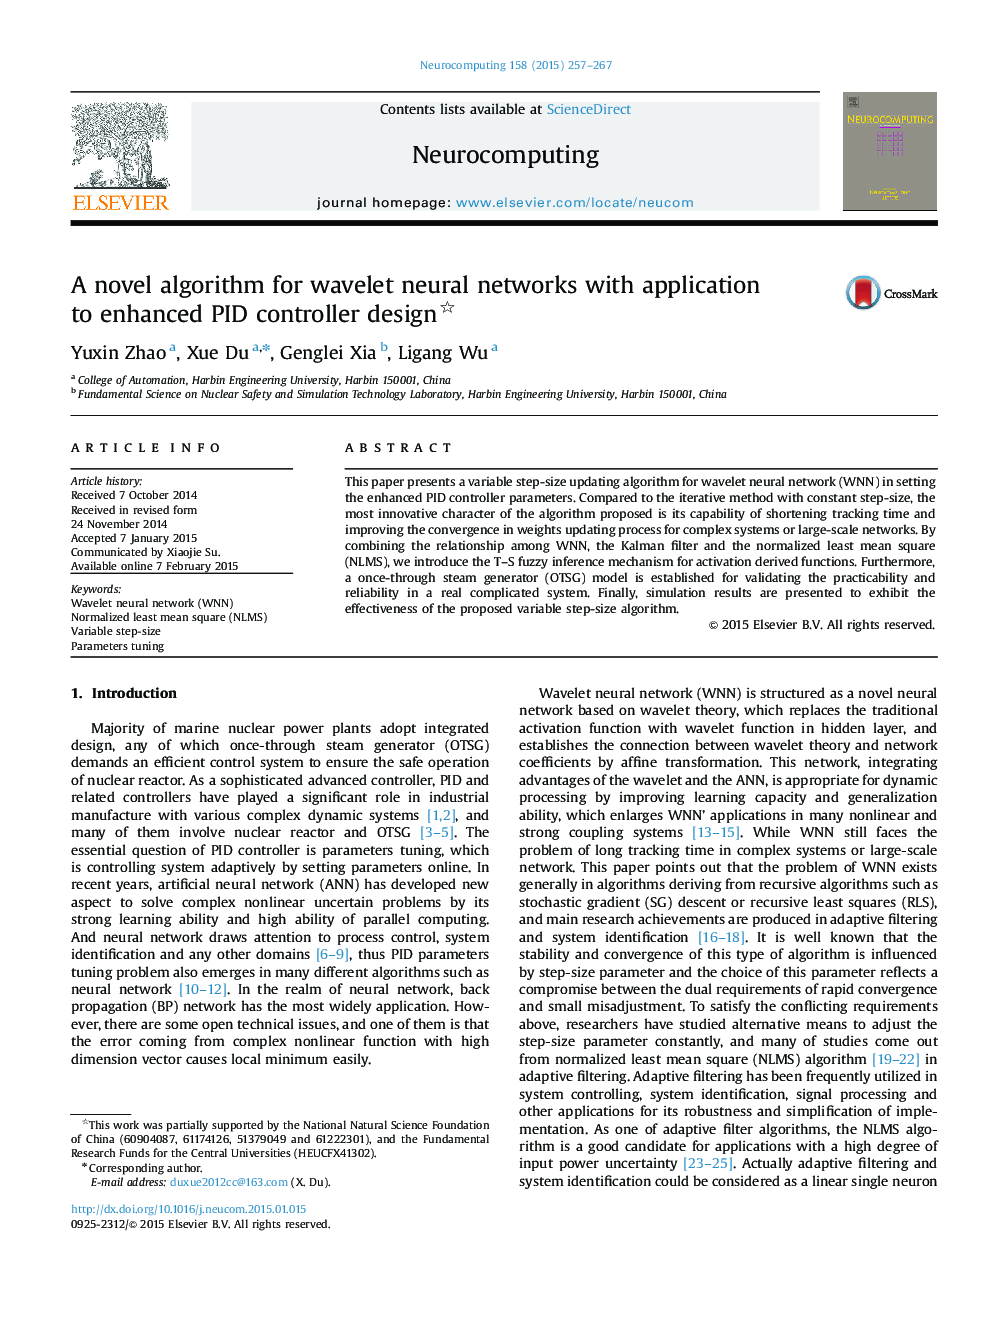 A novel algorithm for wavelet neural networks with application to enhanced PID controller design 